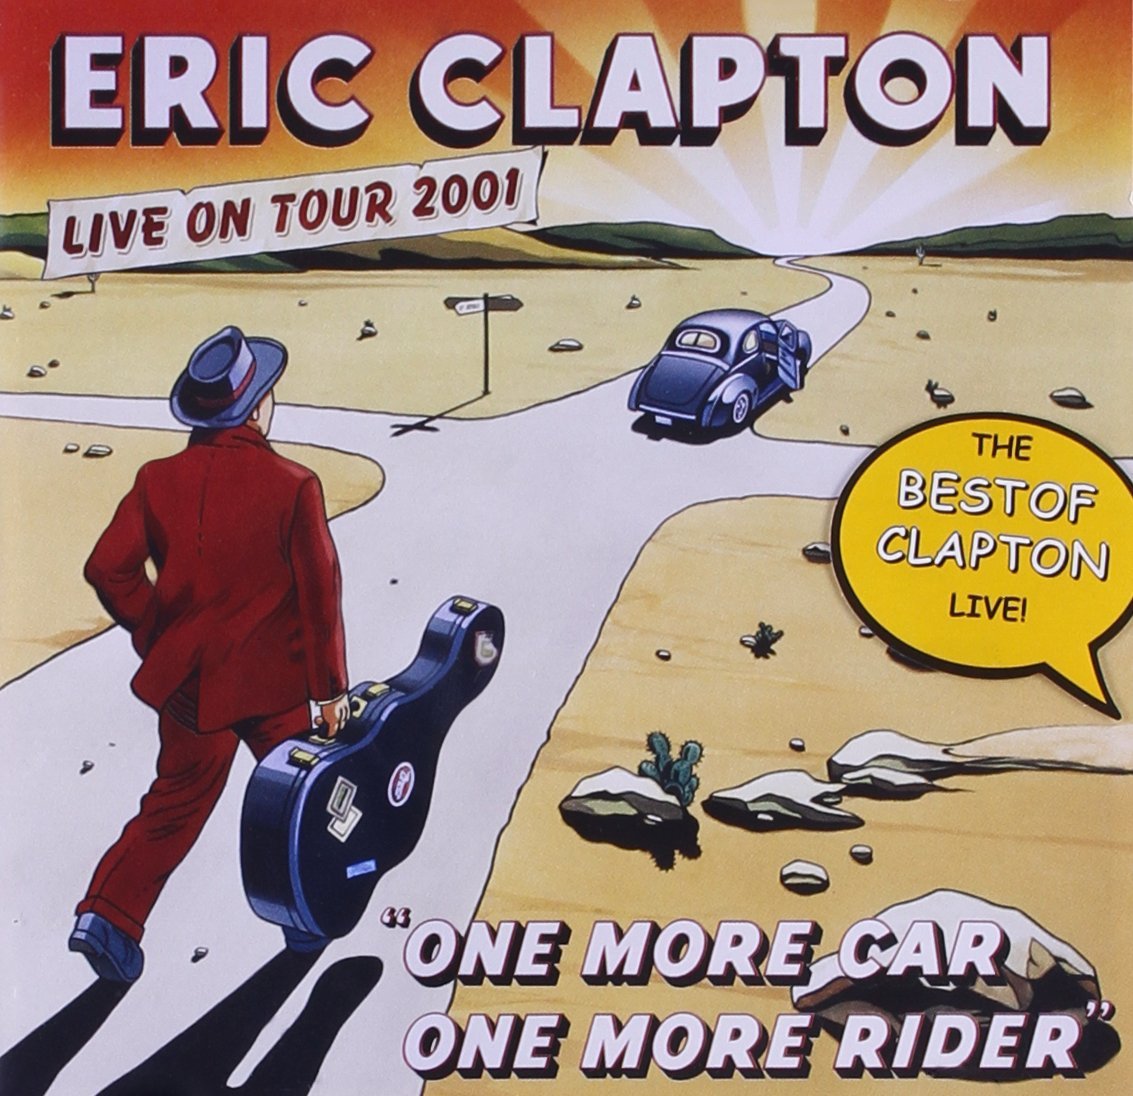 LIVE ON TOUR 2001 -ONE MORE CAR ONE MORE RIDER-